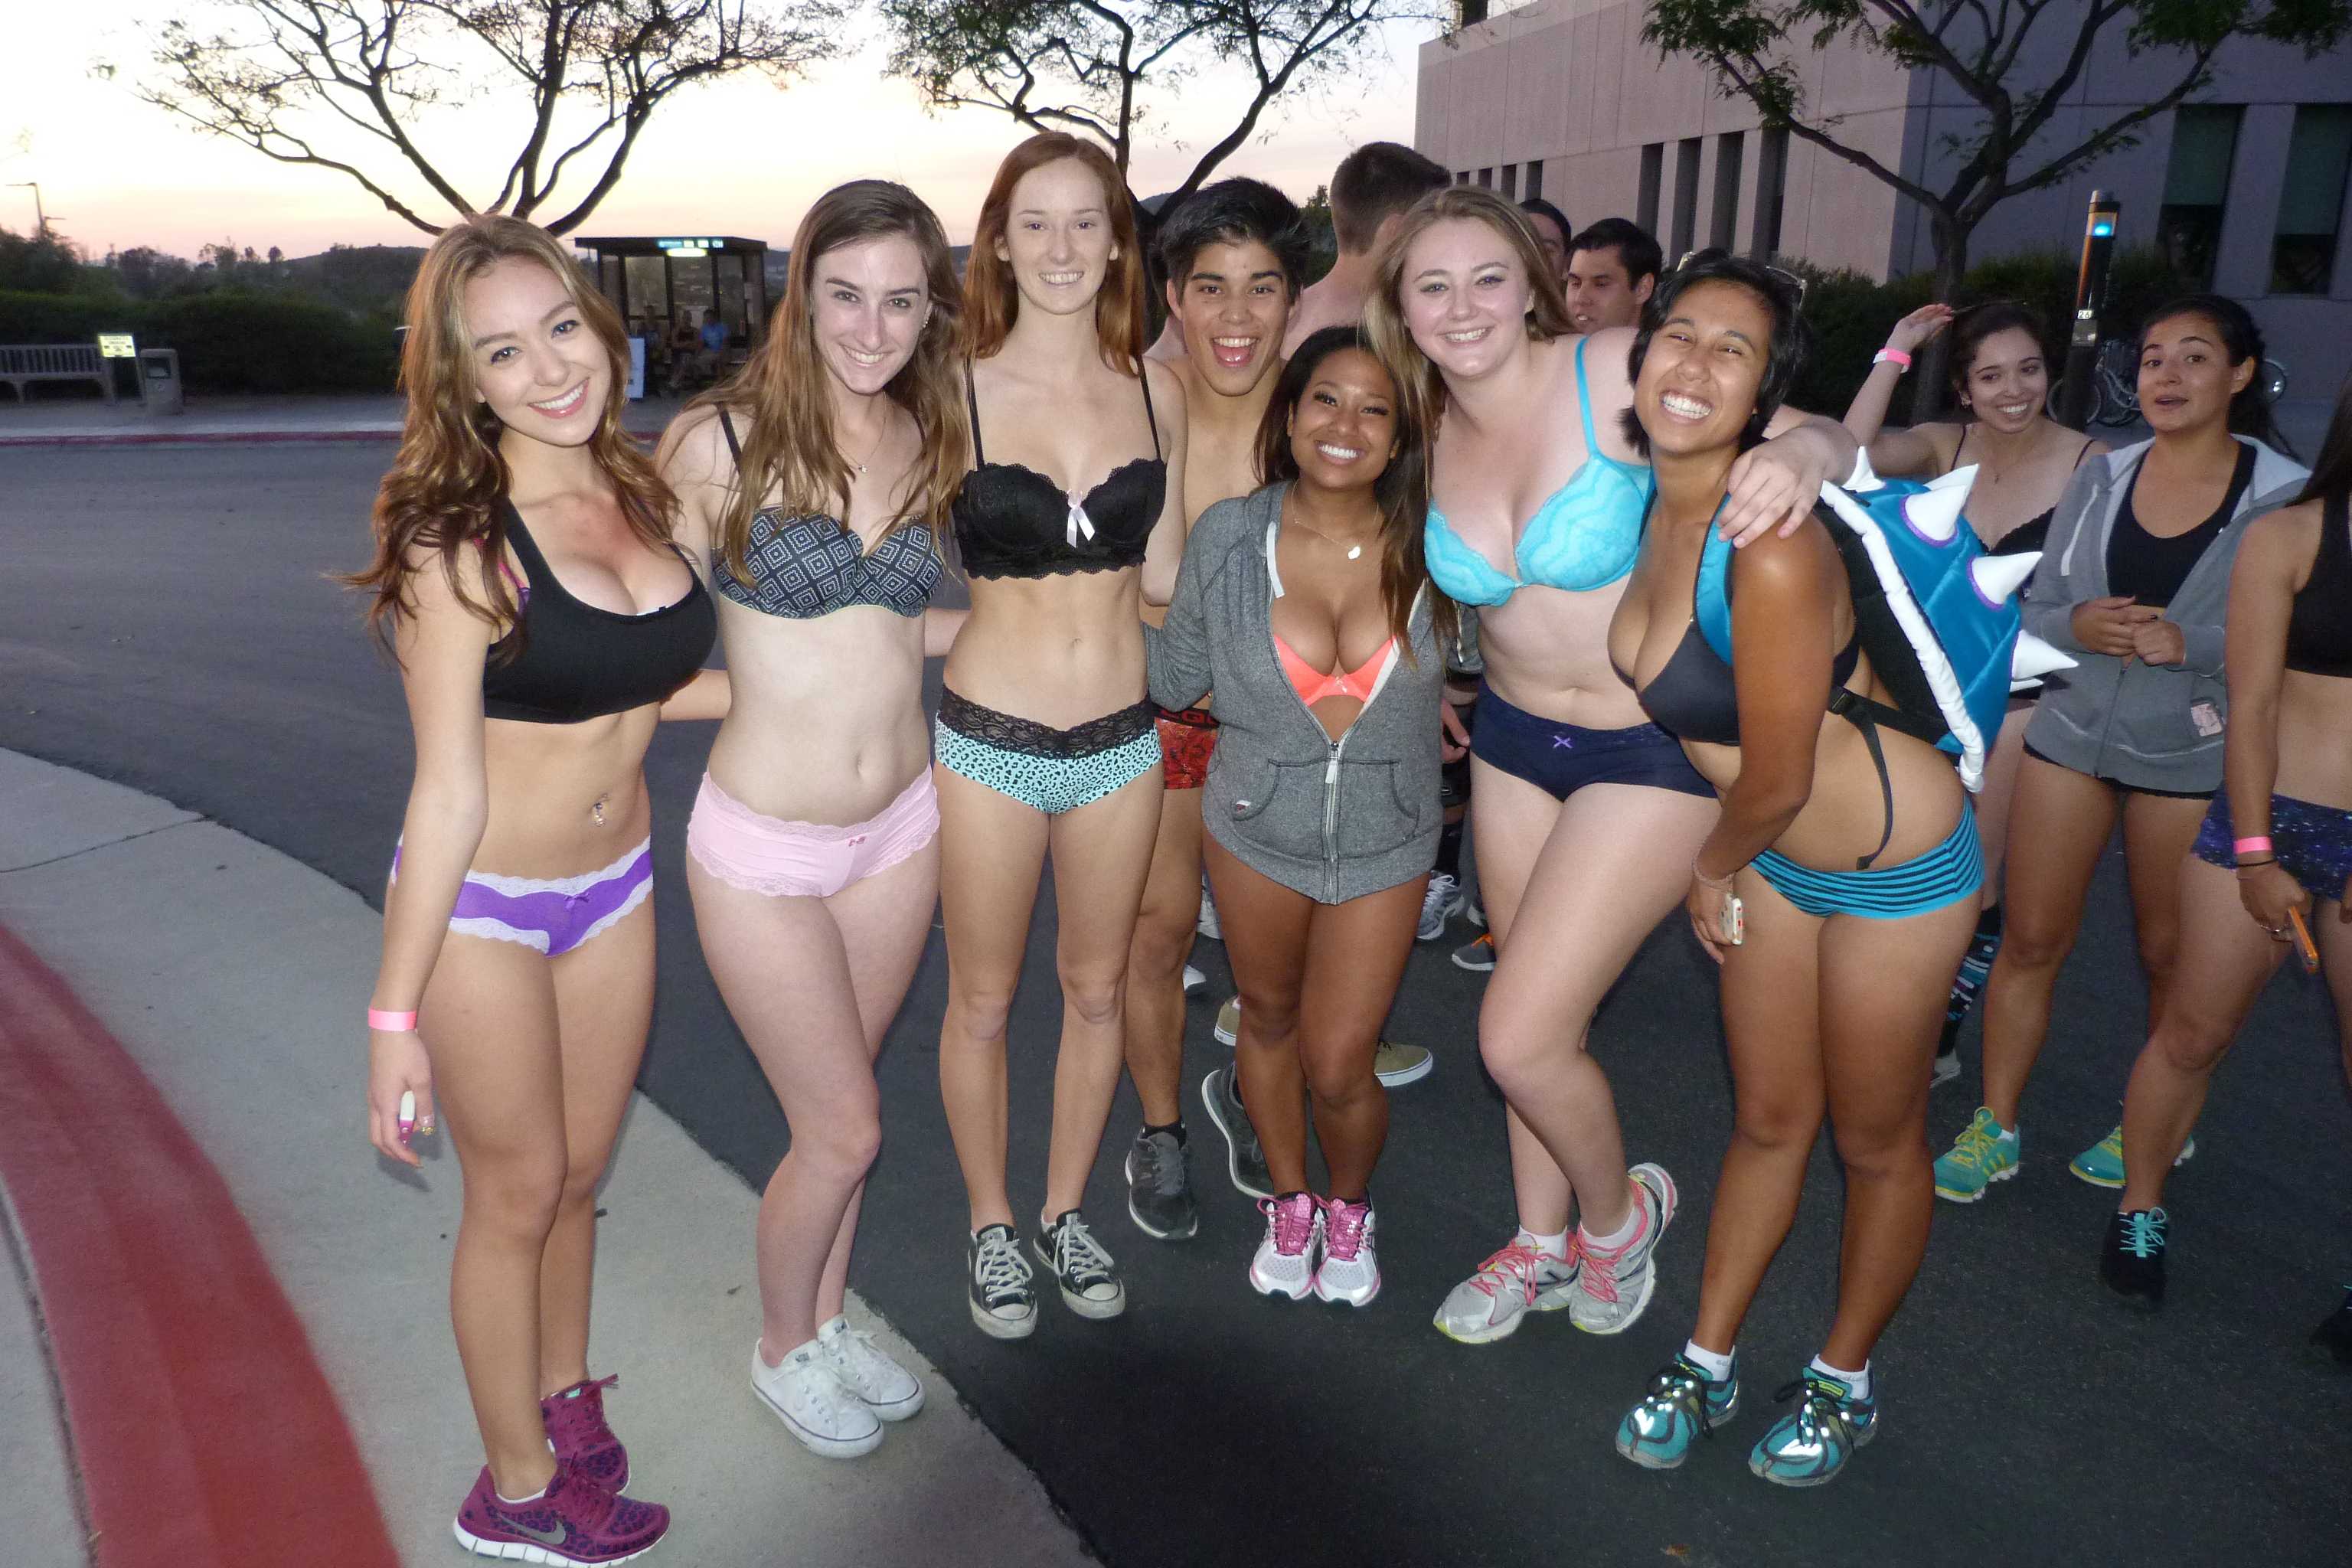 ASI Undie Run 2014 gathers clothes for local shelters - The 